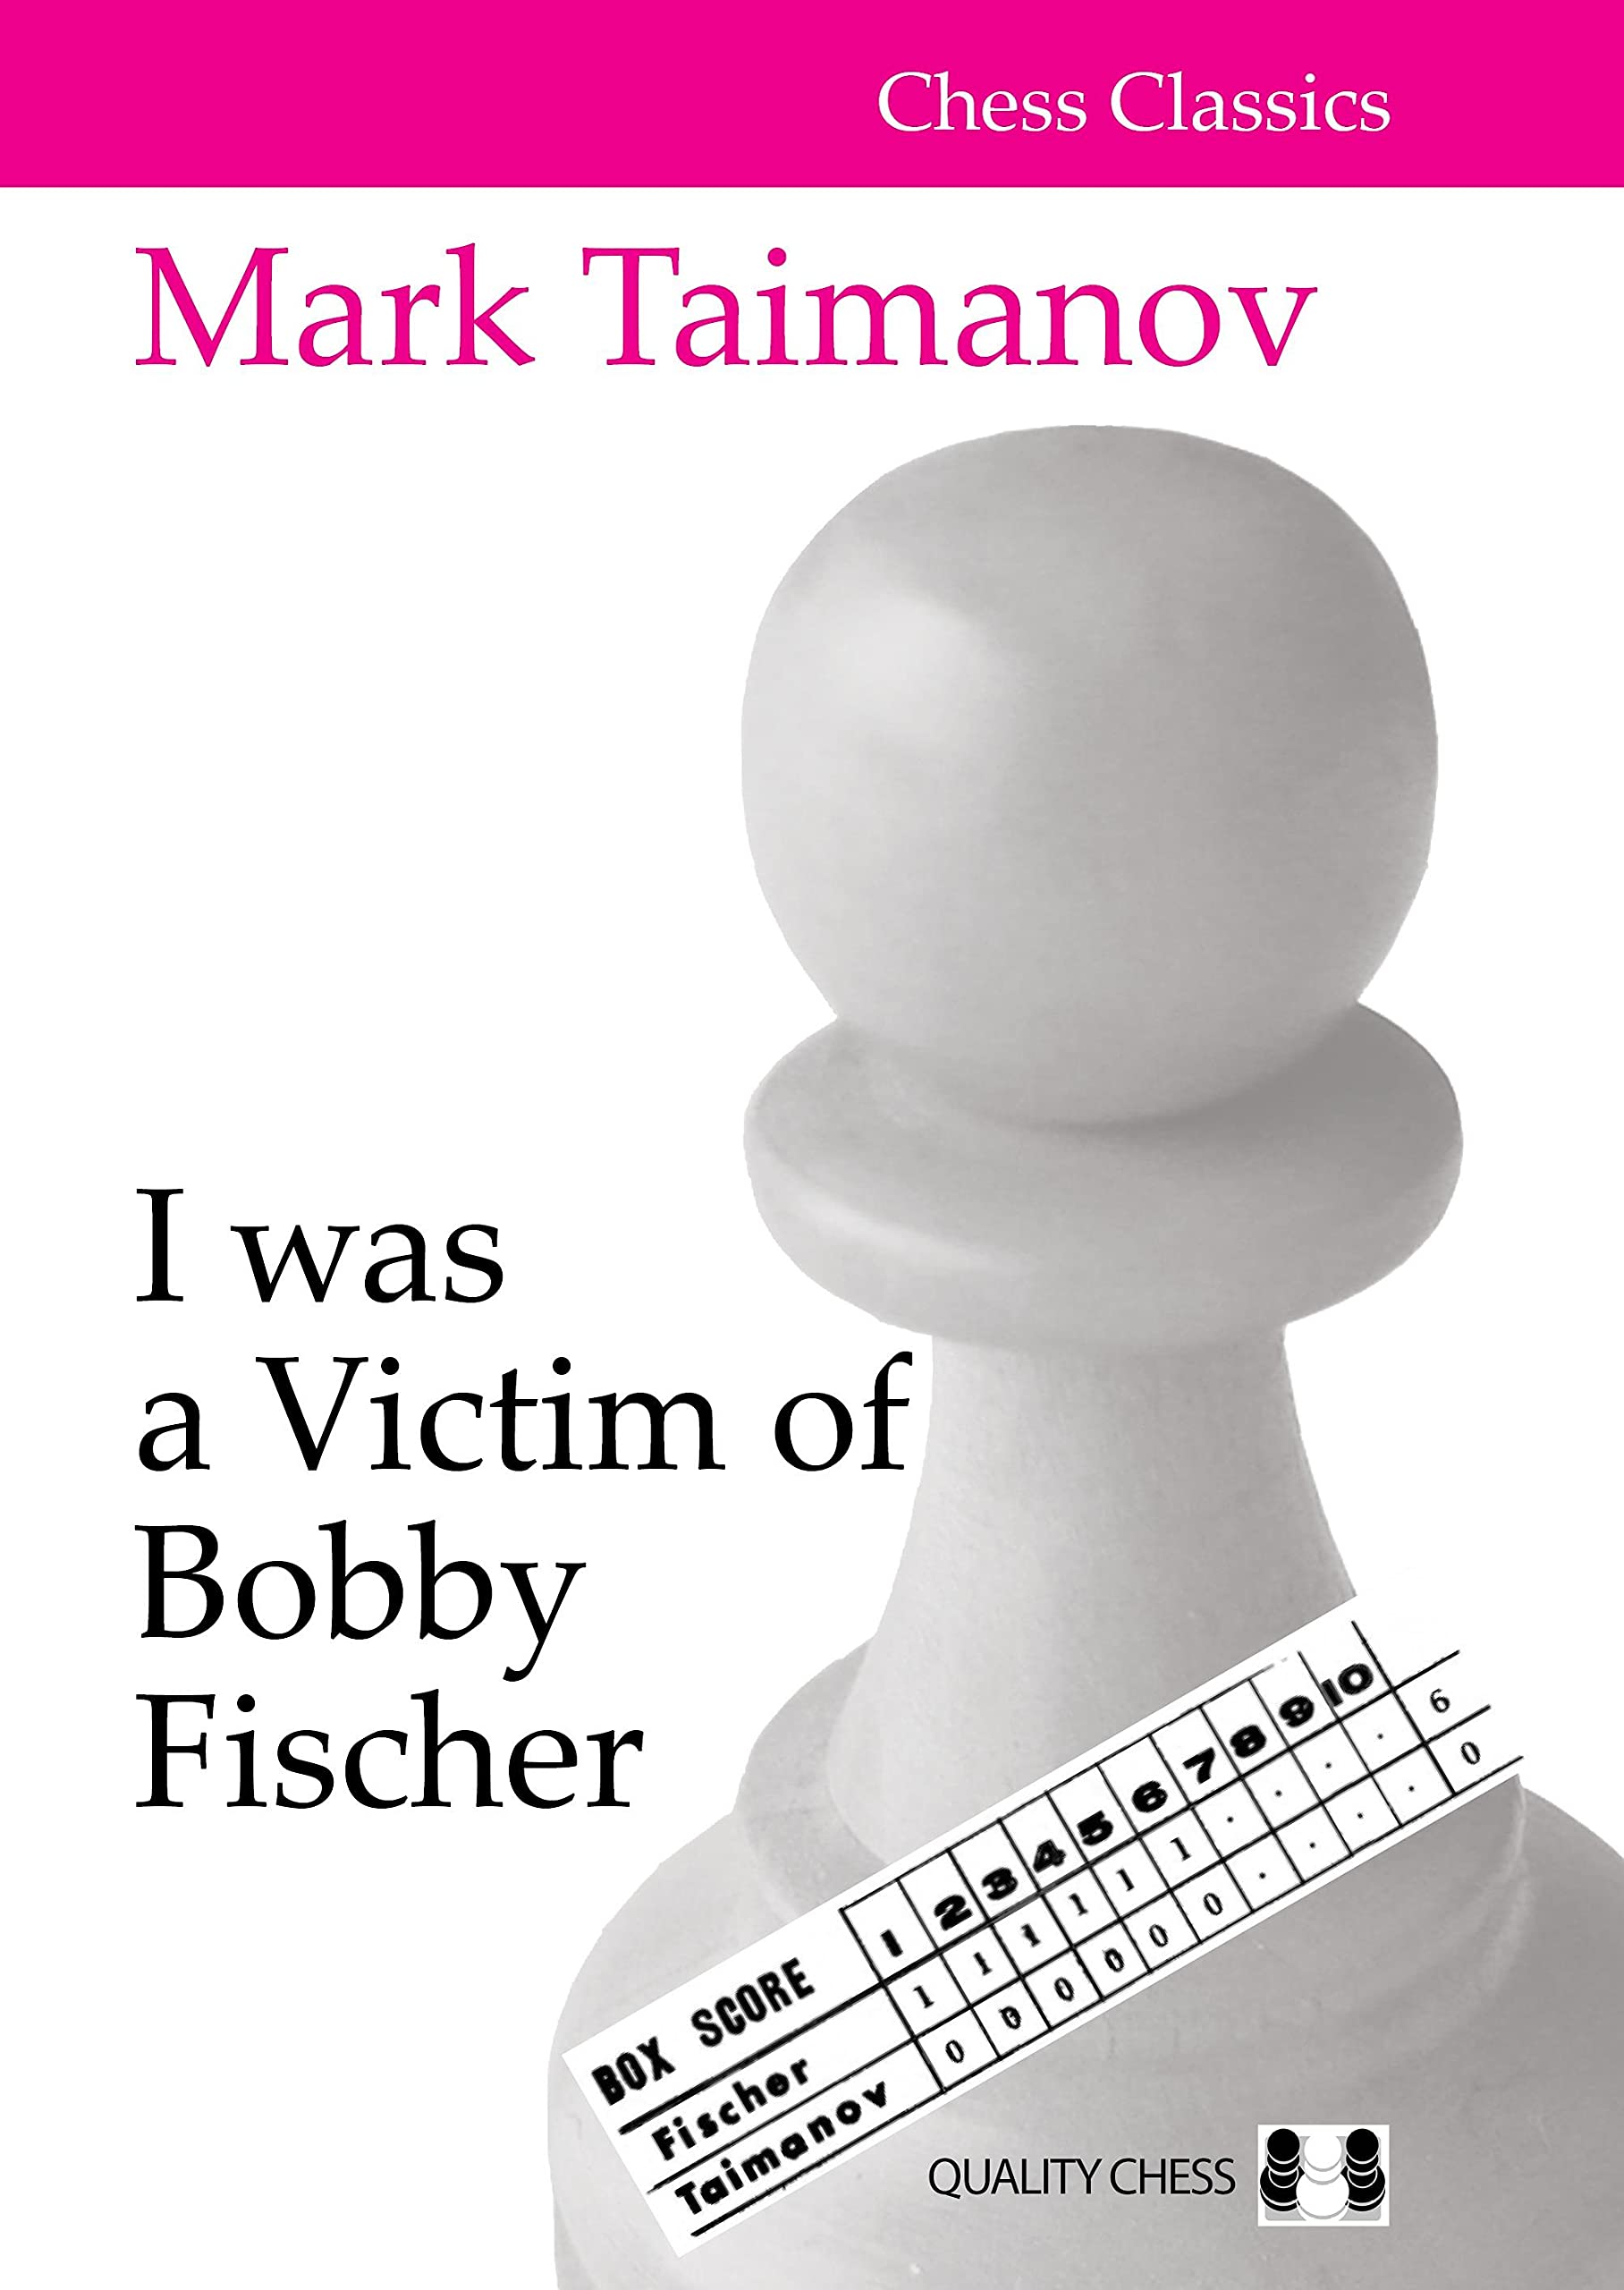 I Was a Victim of Bobby Fischer, Mark Taimanov, Quality Chess, 29th November 2021, ISBN-13 ‏ : ‎ 978-1784831608